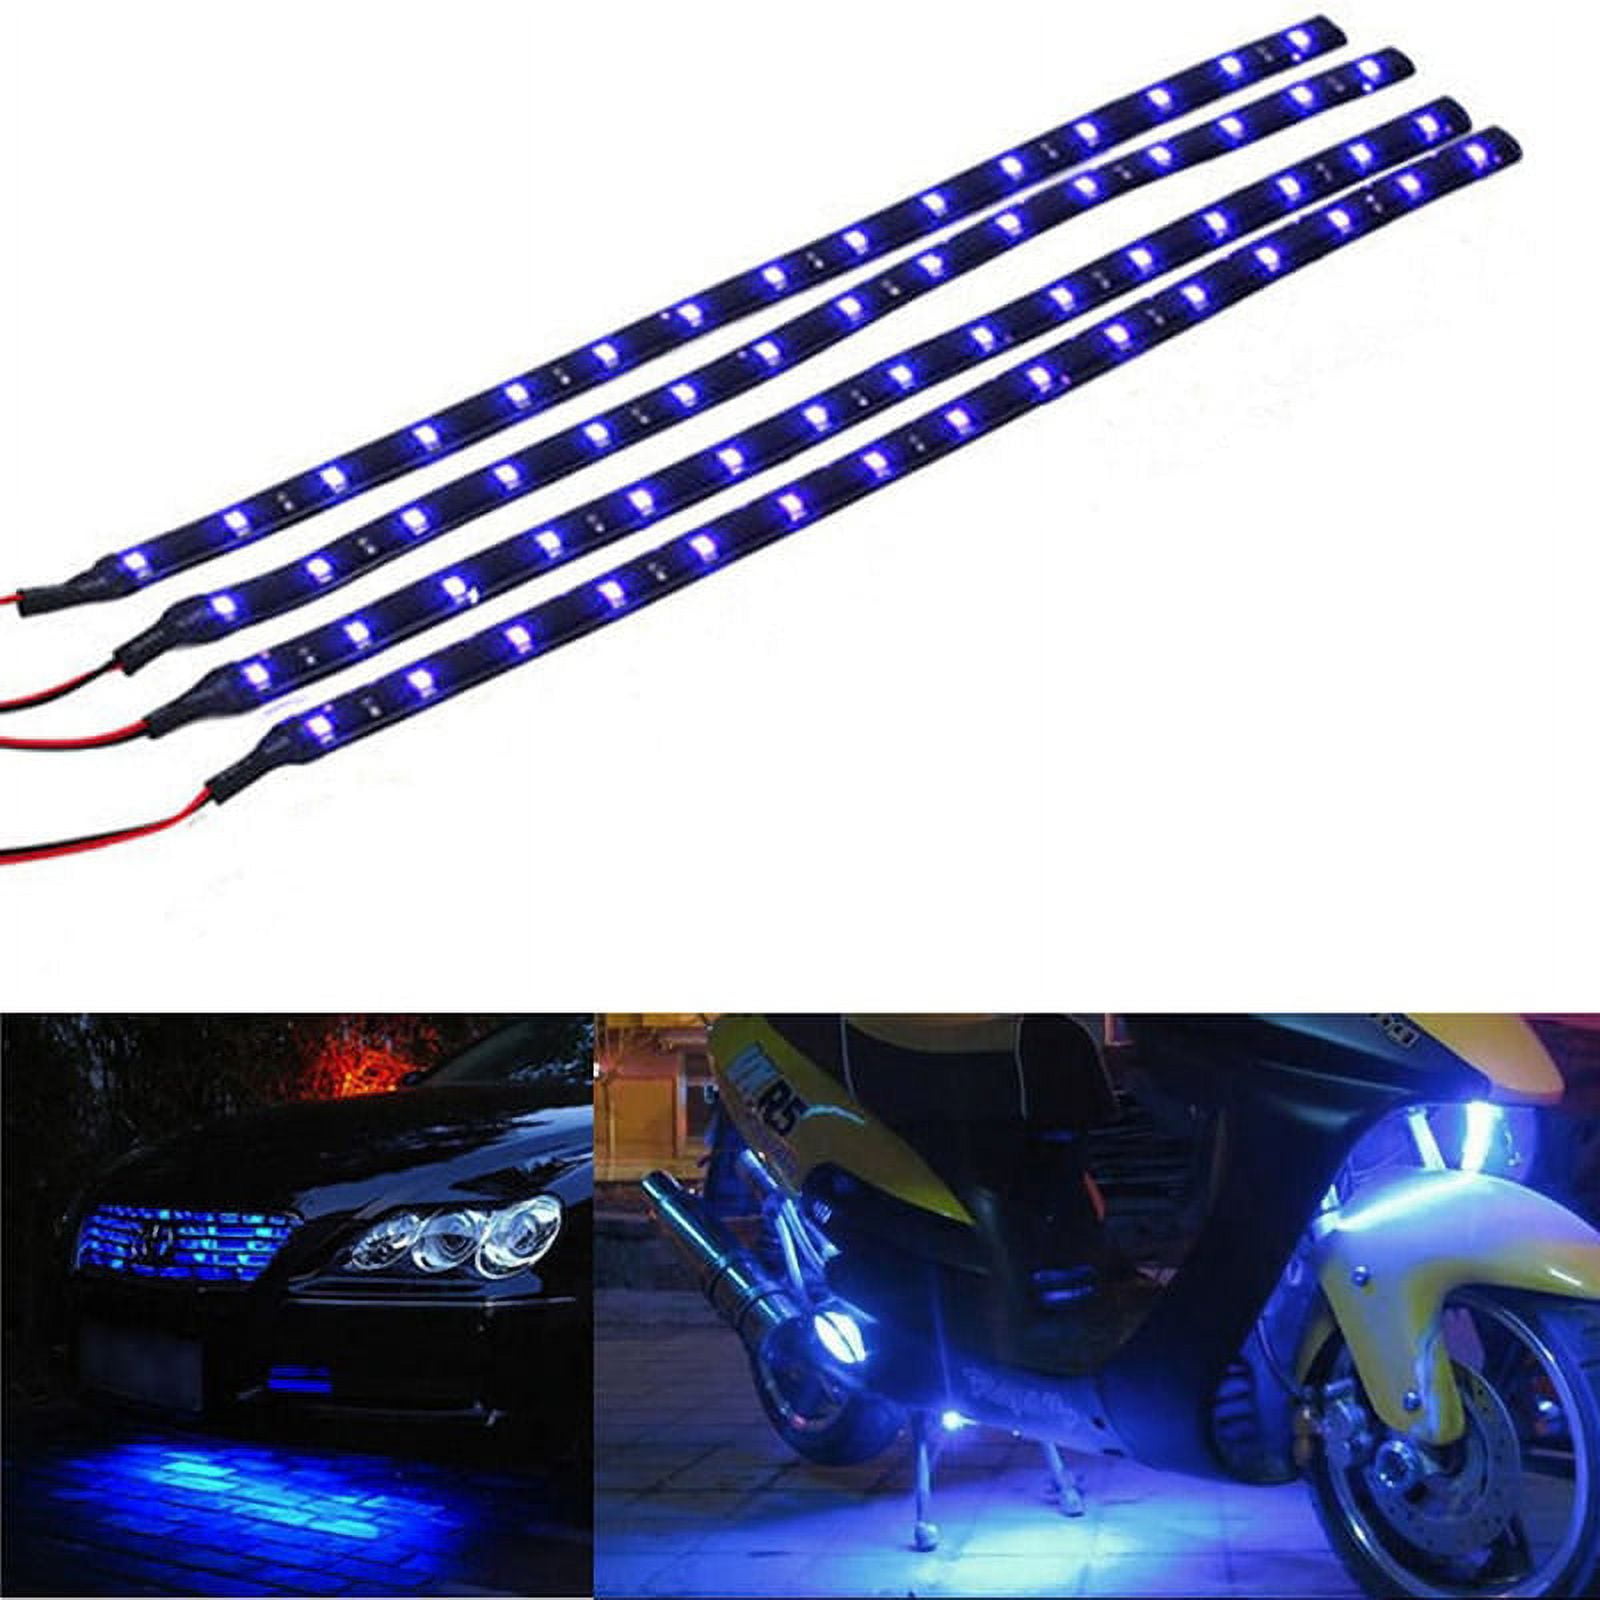 Blue (465-475nm) LED Strip Lights 12V Waterproof for Auto Car Truck Boat  Motorcycle Interior Lighting 12'' 30CM 2835 SMD UL Listed Pack of 4